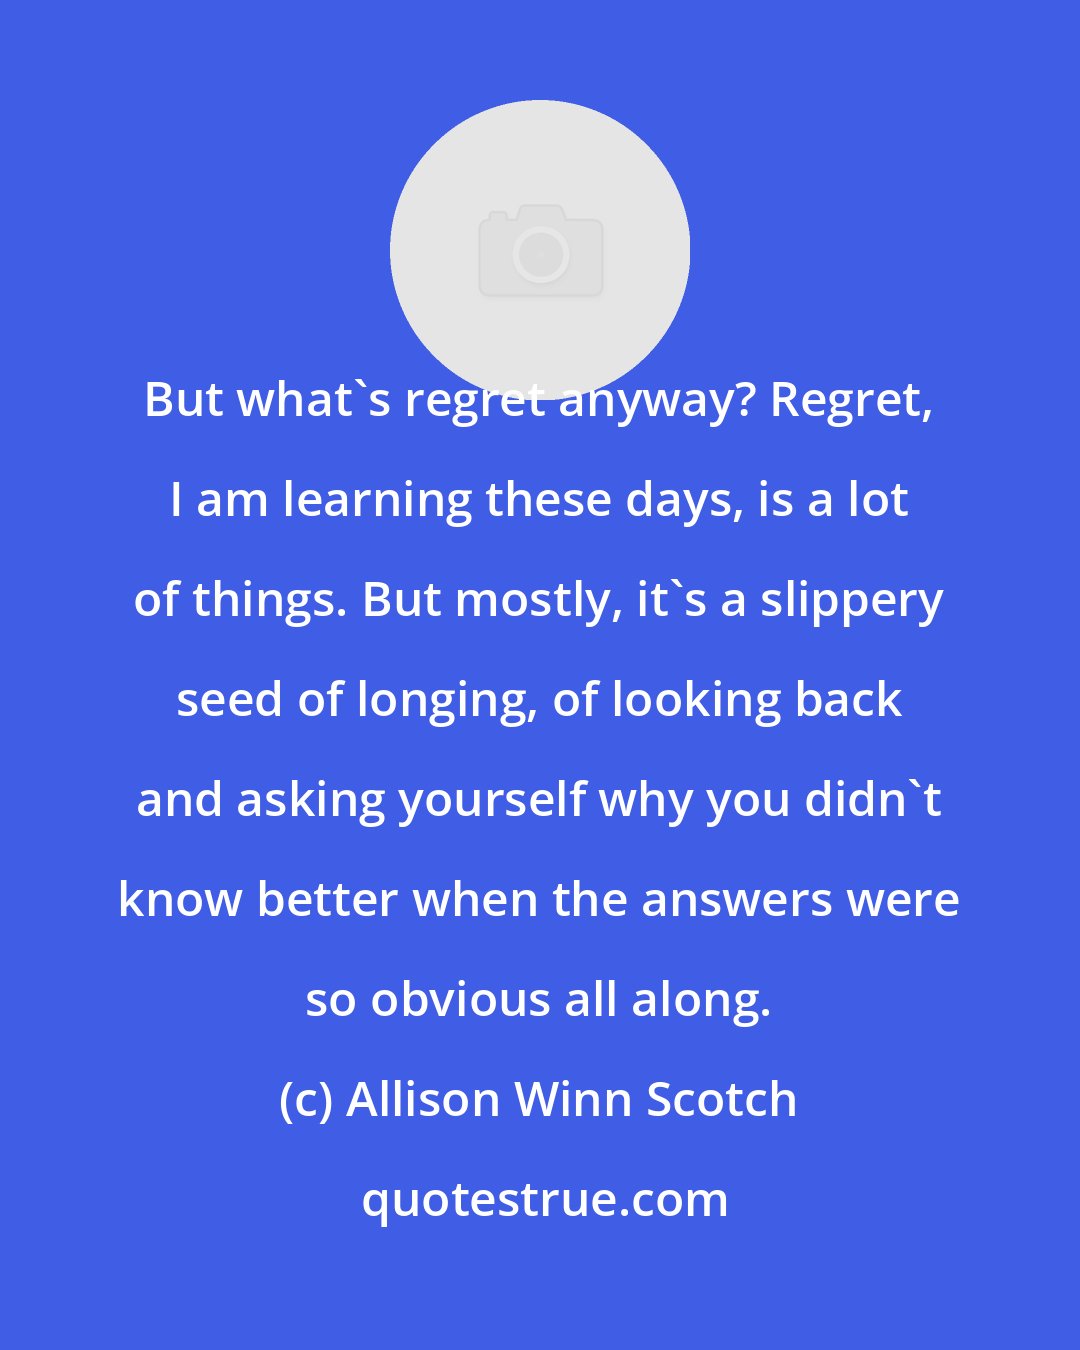 Allison Winn Scotch: But what's regret anyway? Regret, I am learning these days, is a lot of things. But mostly, it's a slippery seed of longing, of looking back and asking yourself why you didn't know better when the answers were so obvious all along.